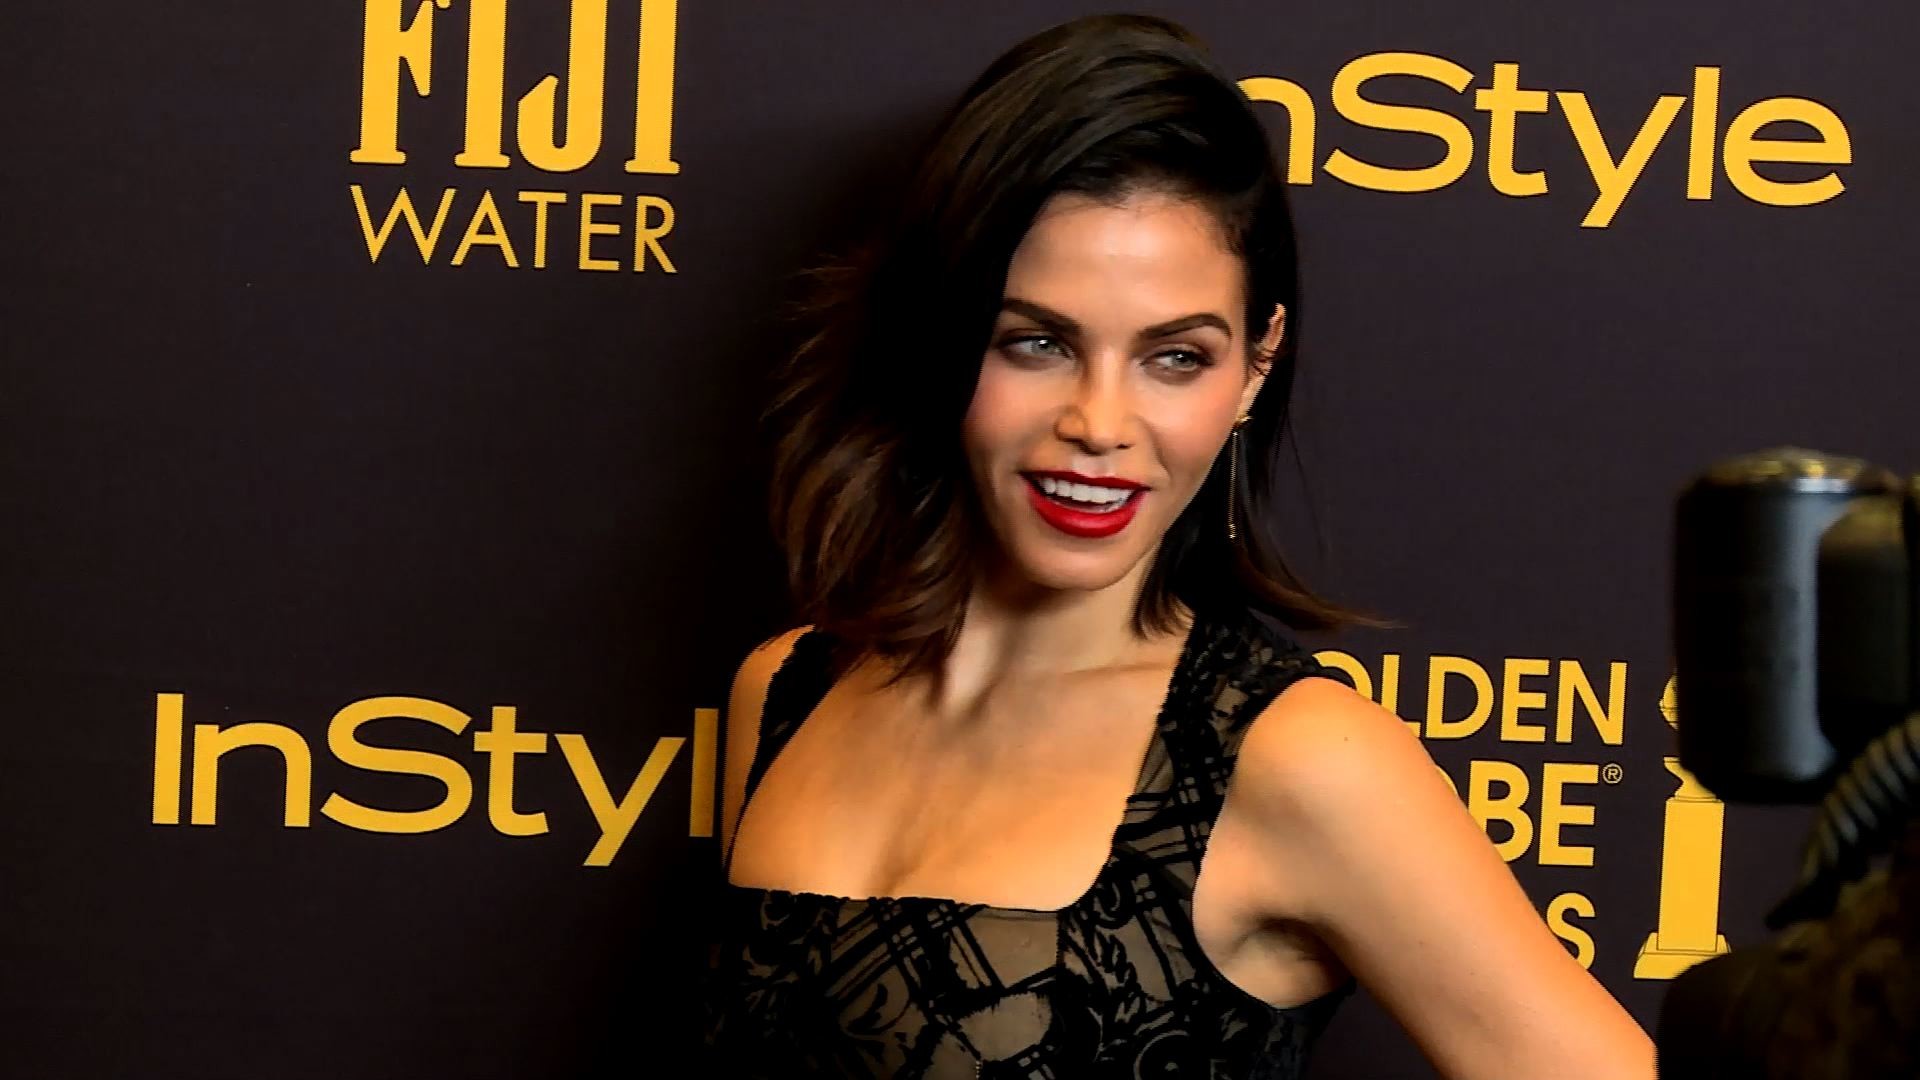 Jenna Dewan Tatum dishes on her daughters style selections